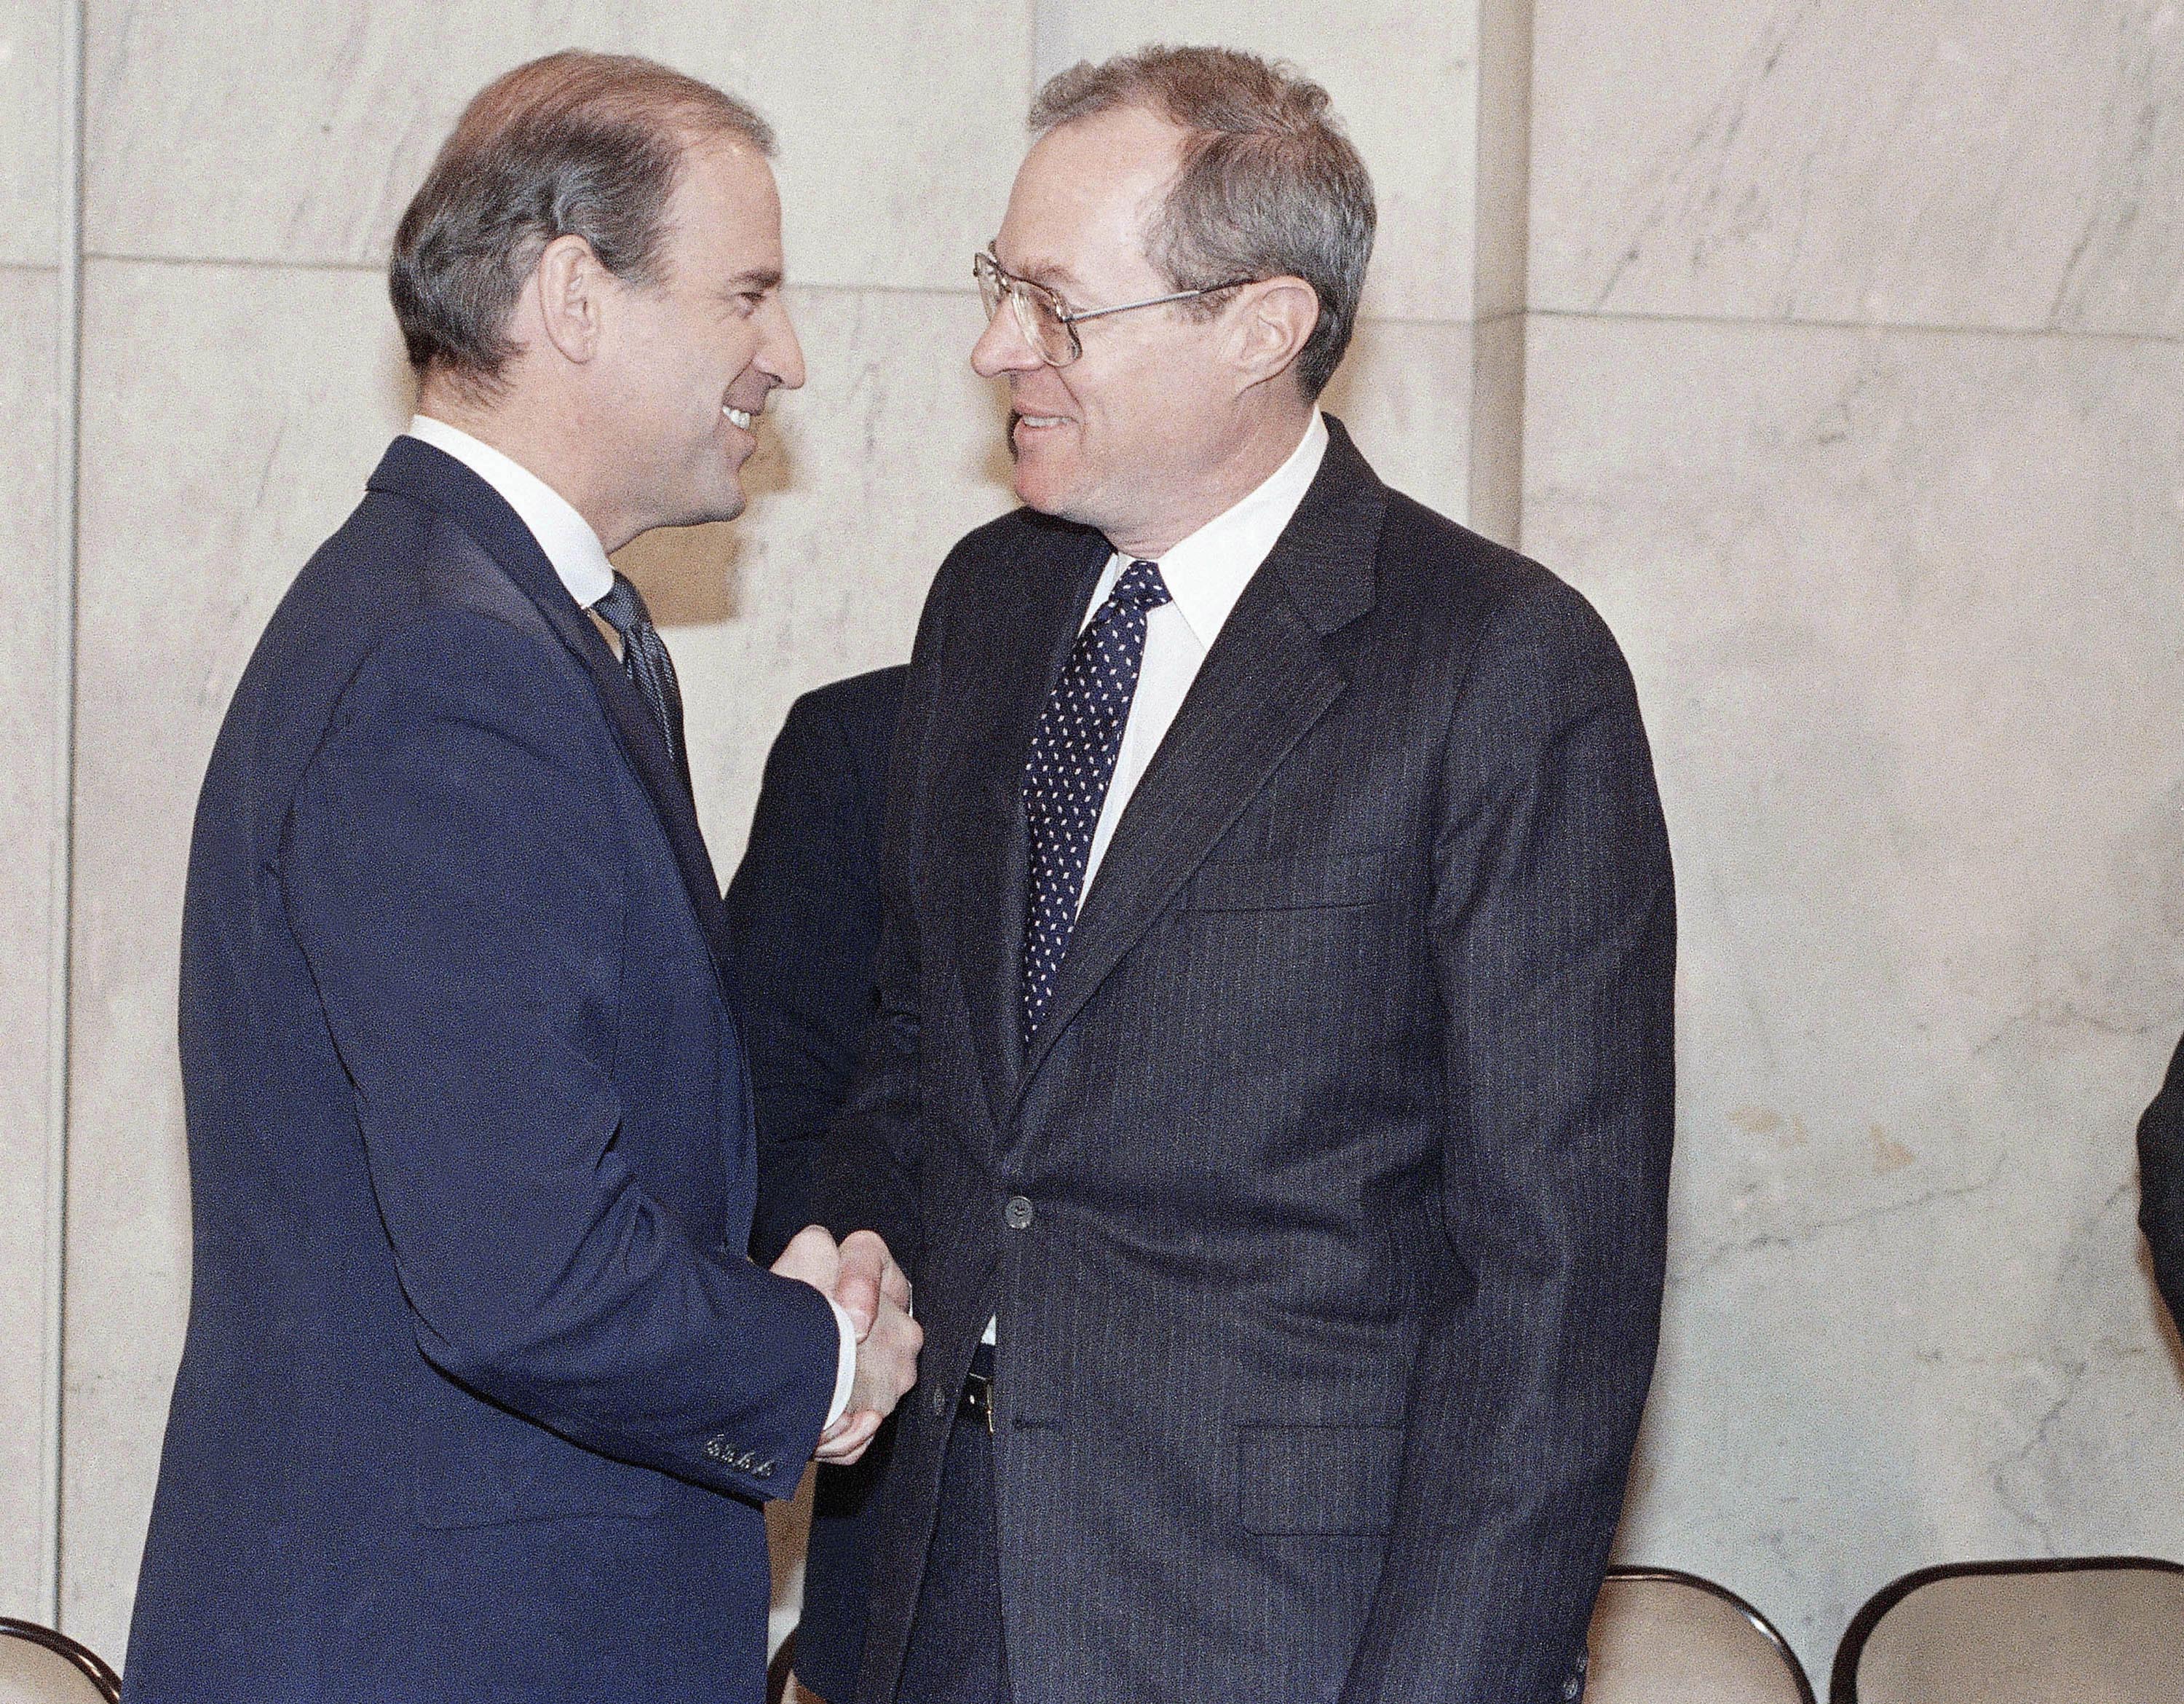 Supreme Court nominee Anthony M. Kennedy, right, shakes hands with then-Senate Judiciary Committee Chairman Joseph Biden of Delaware before the start to his confirmation hearing at Capitol Hill in December 1987.